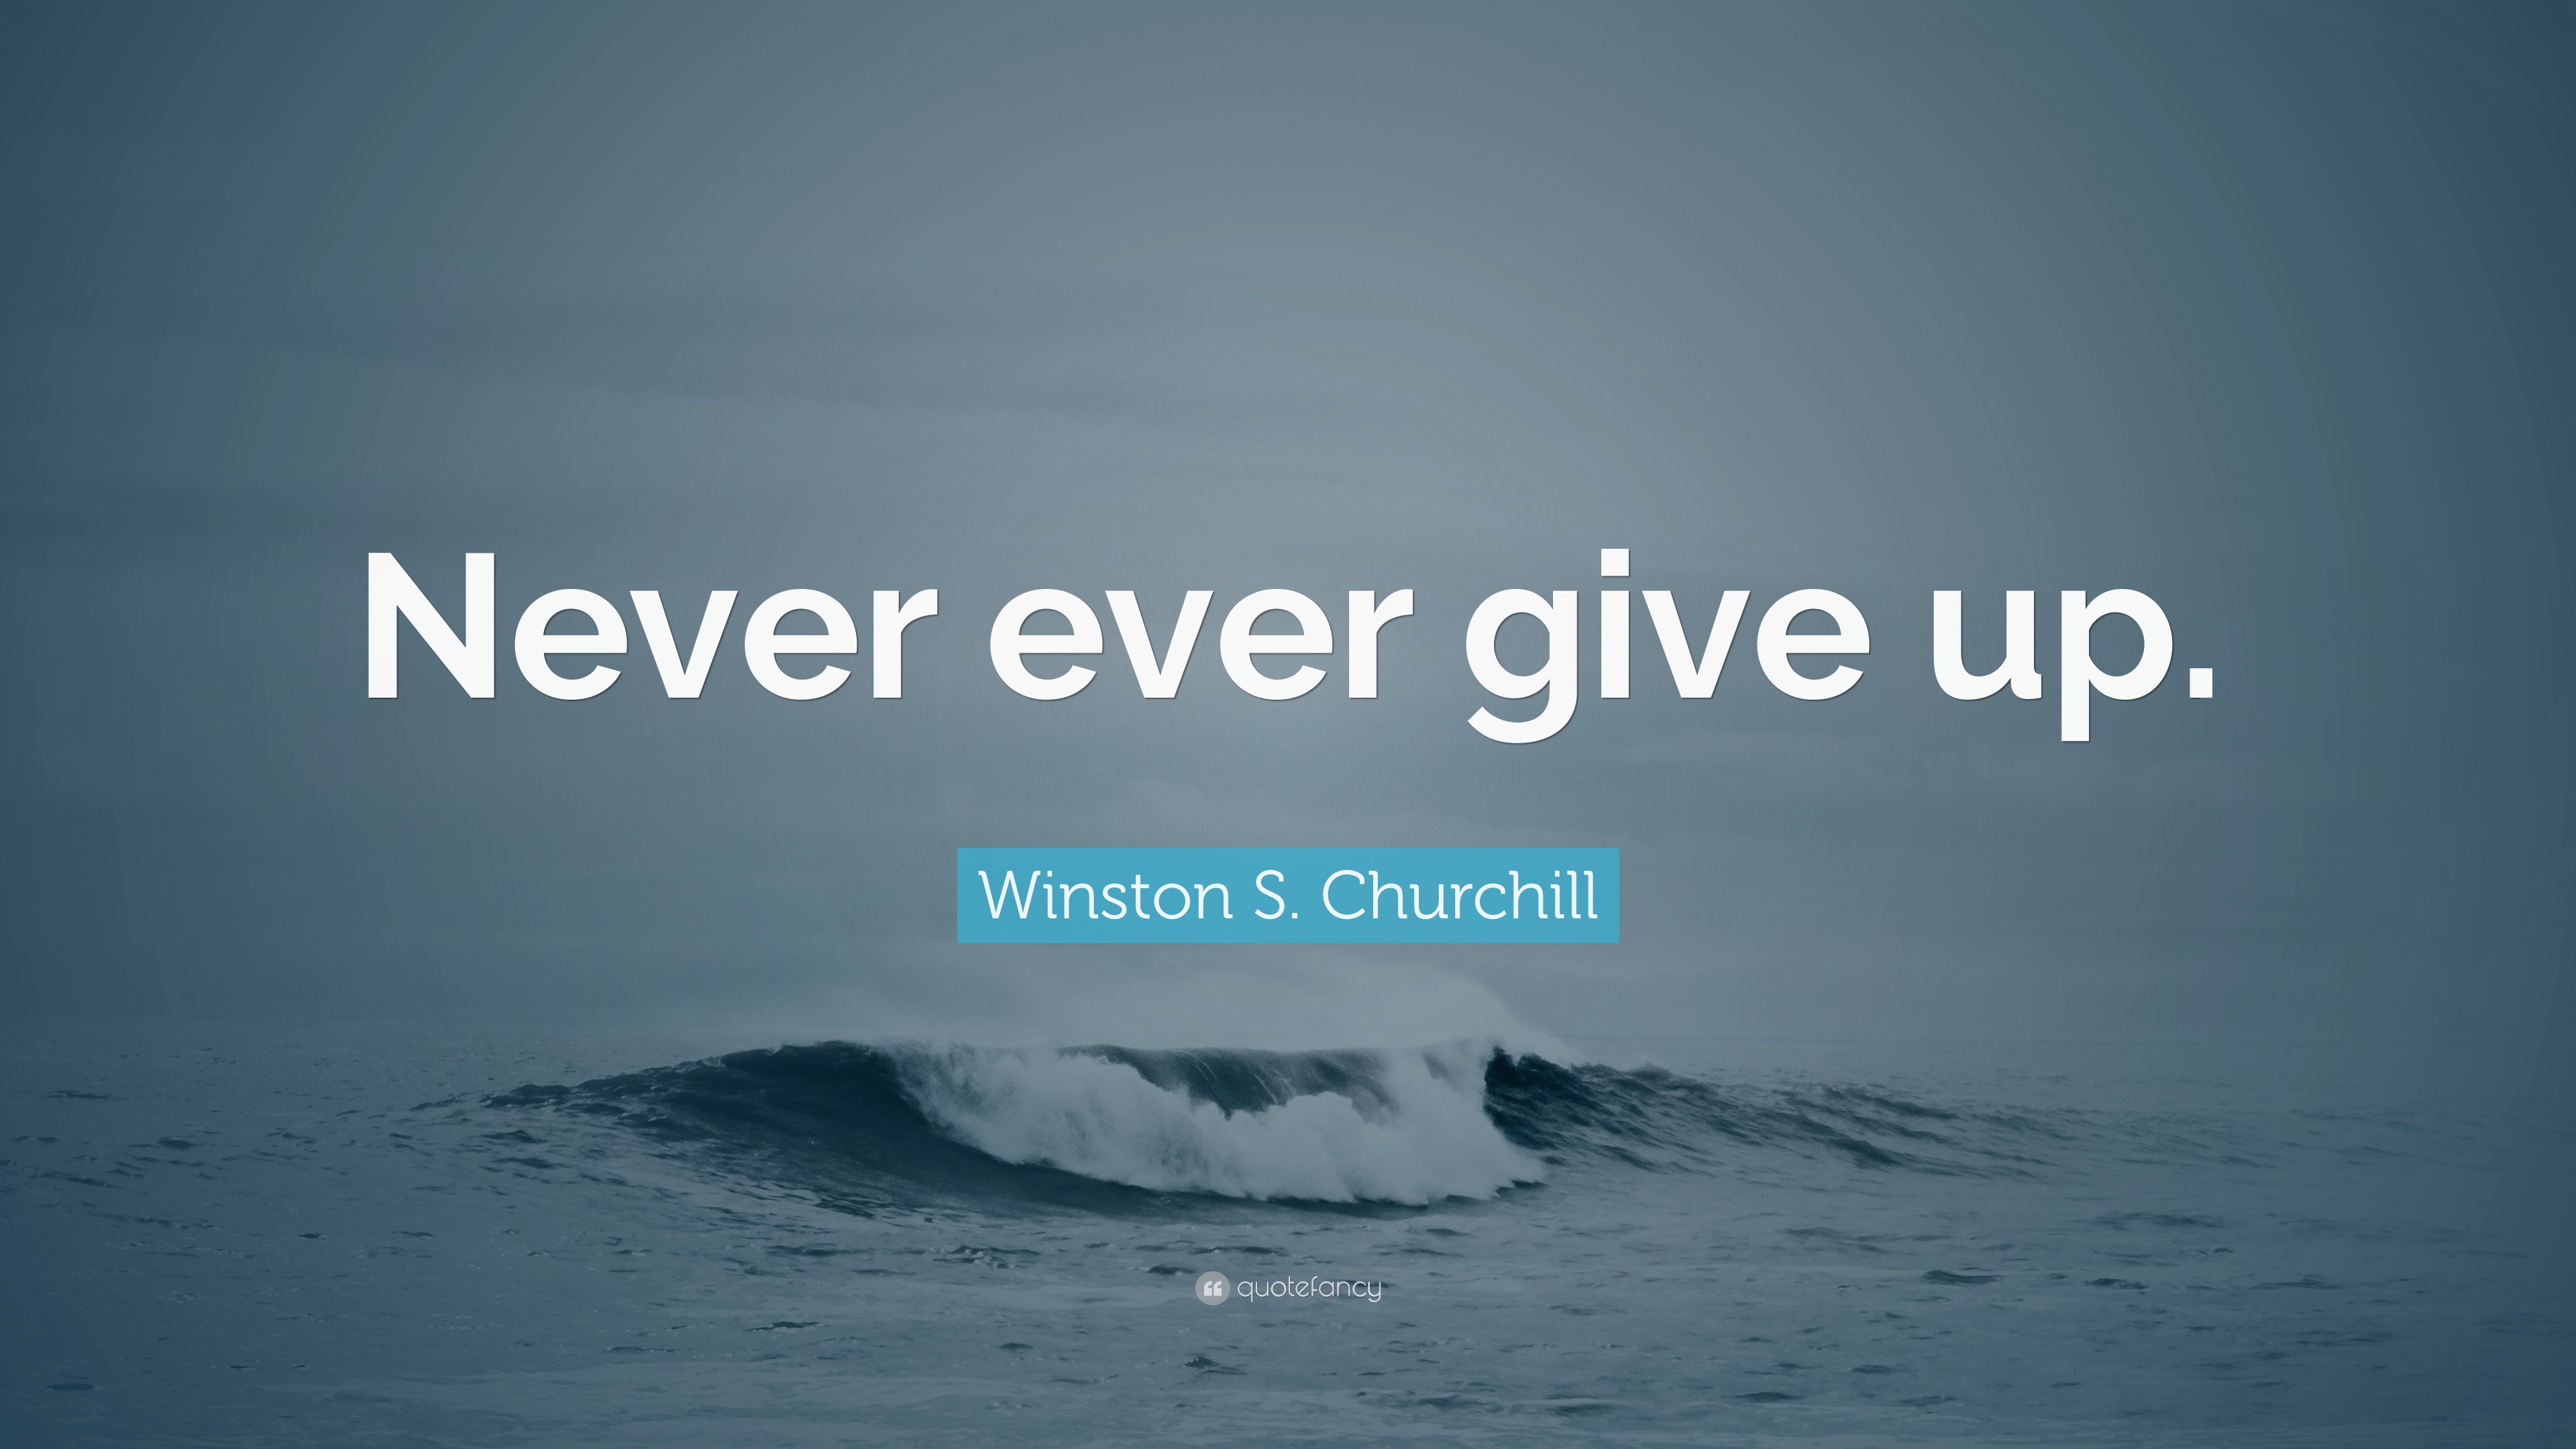 Winston S. Churchill Quote: “Never ever give up.”